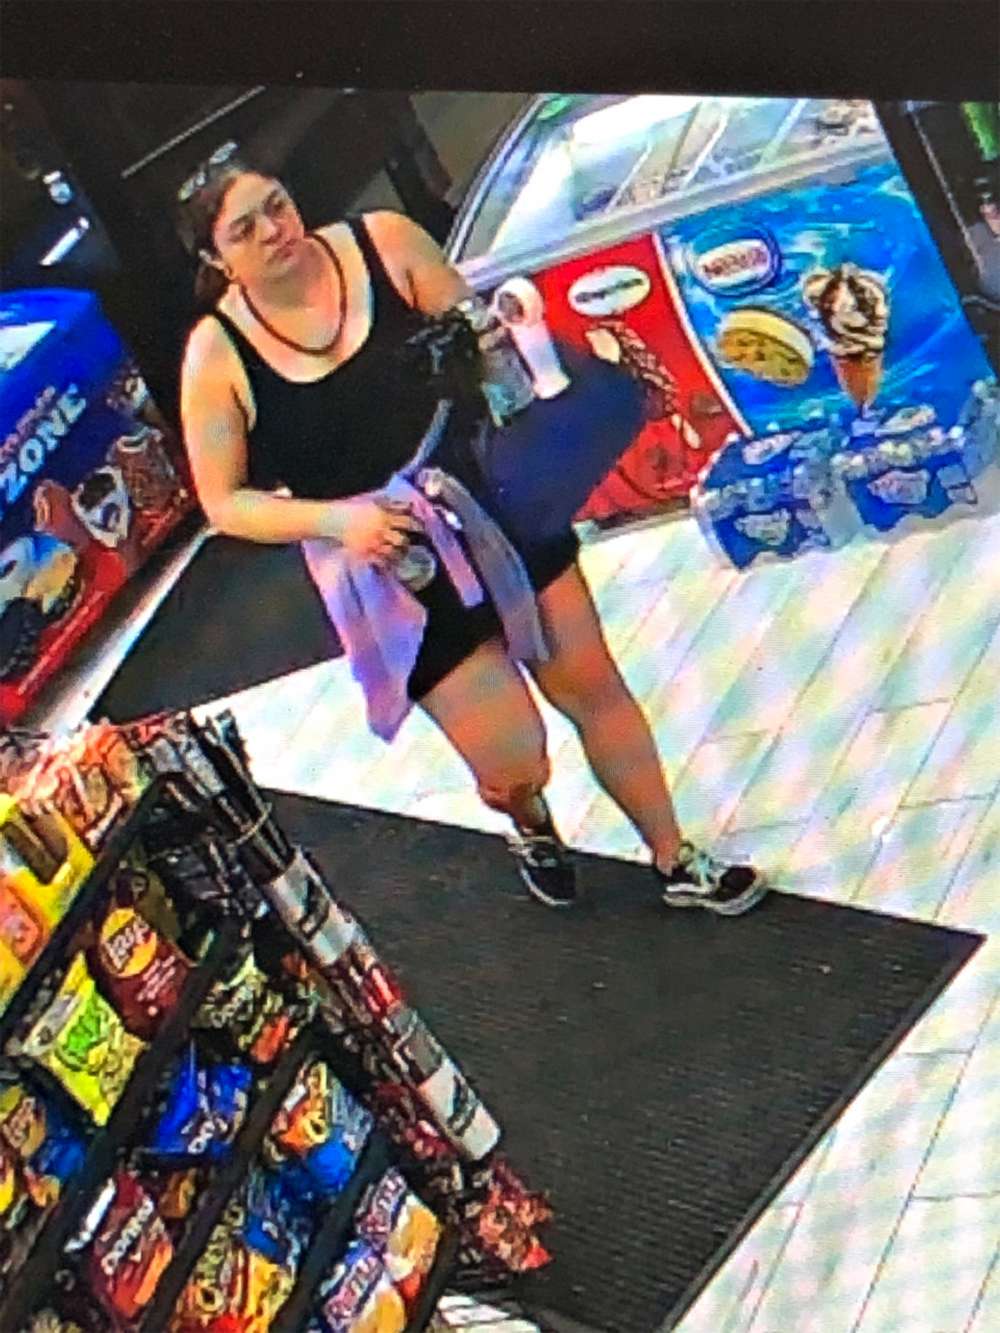 PHOTO: An arrest warrant has been issued by Atlanta Fire Investigators for Natalie White, identified as a suspect in the arson fire that burned down the Wendy’s Restaurant (125 University Ave), on June 13, 2020.